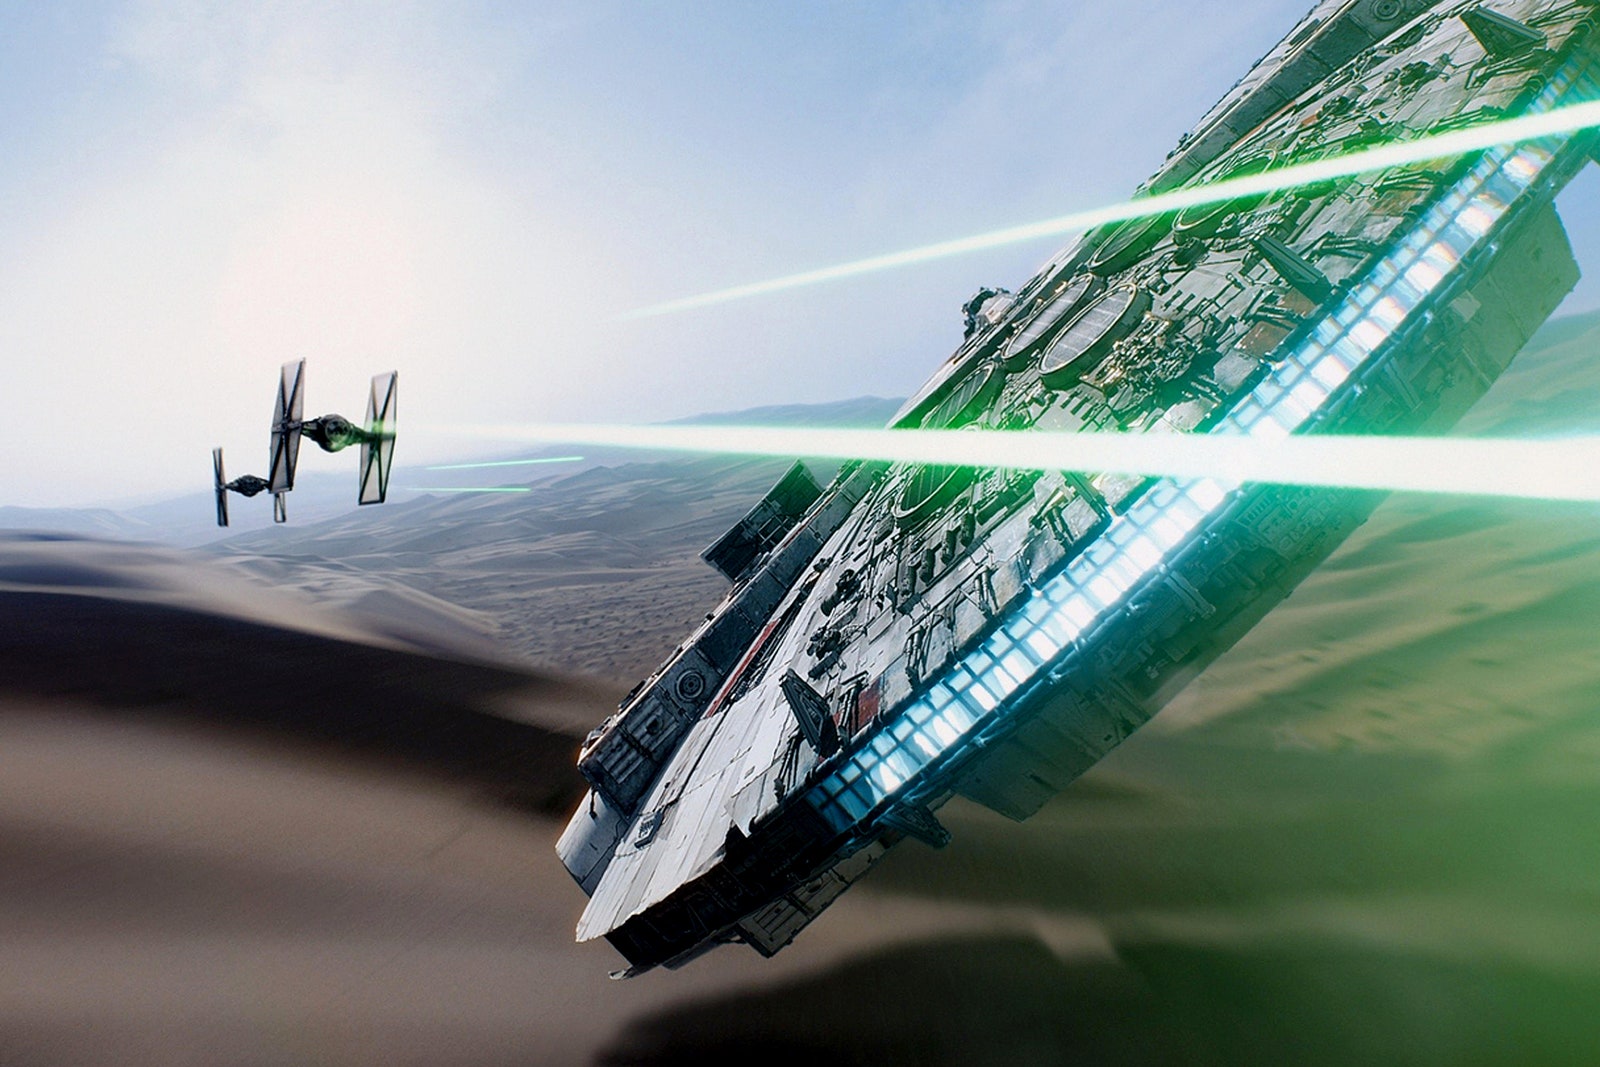 Still from STAR WARS THE FORCE AWAKENS featuring two spaceships flying and shooting lasers